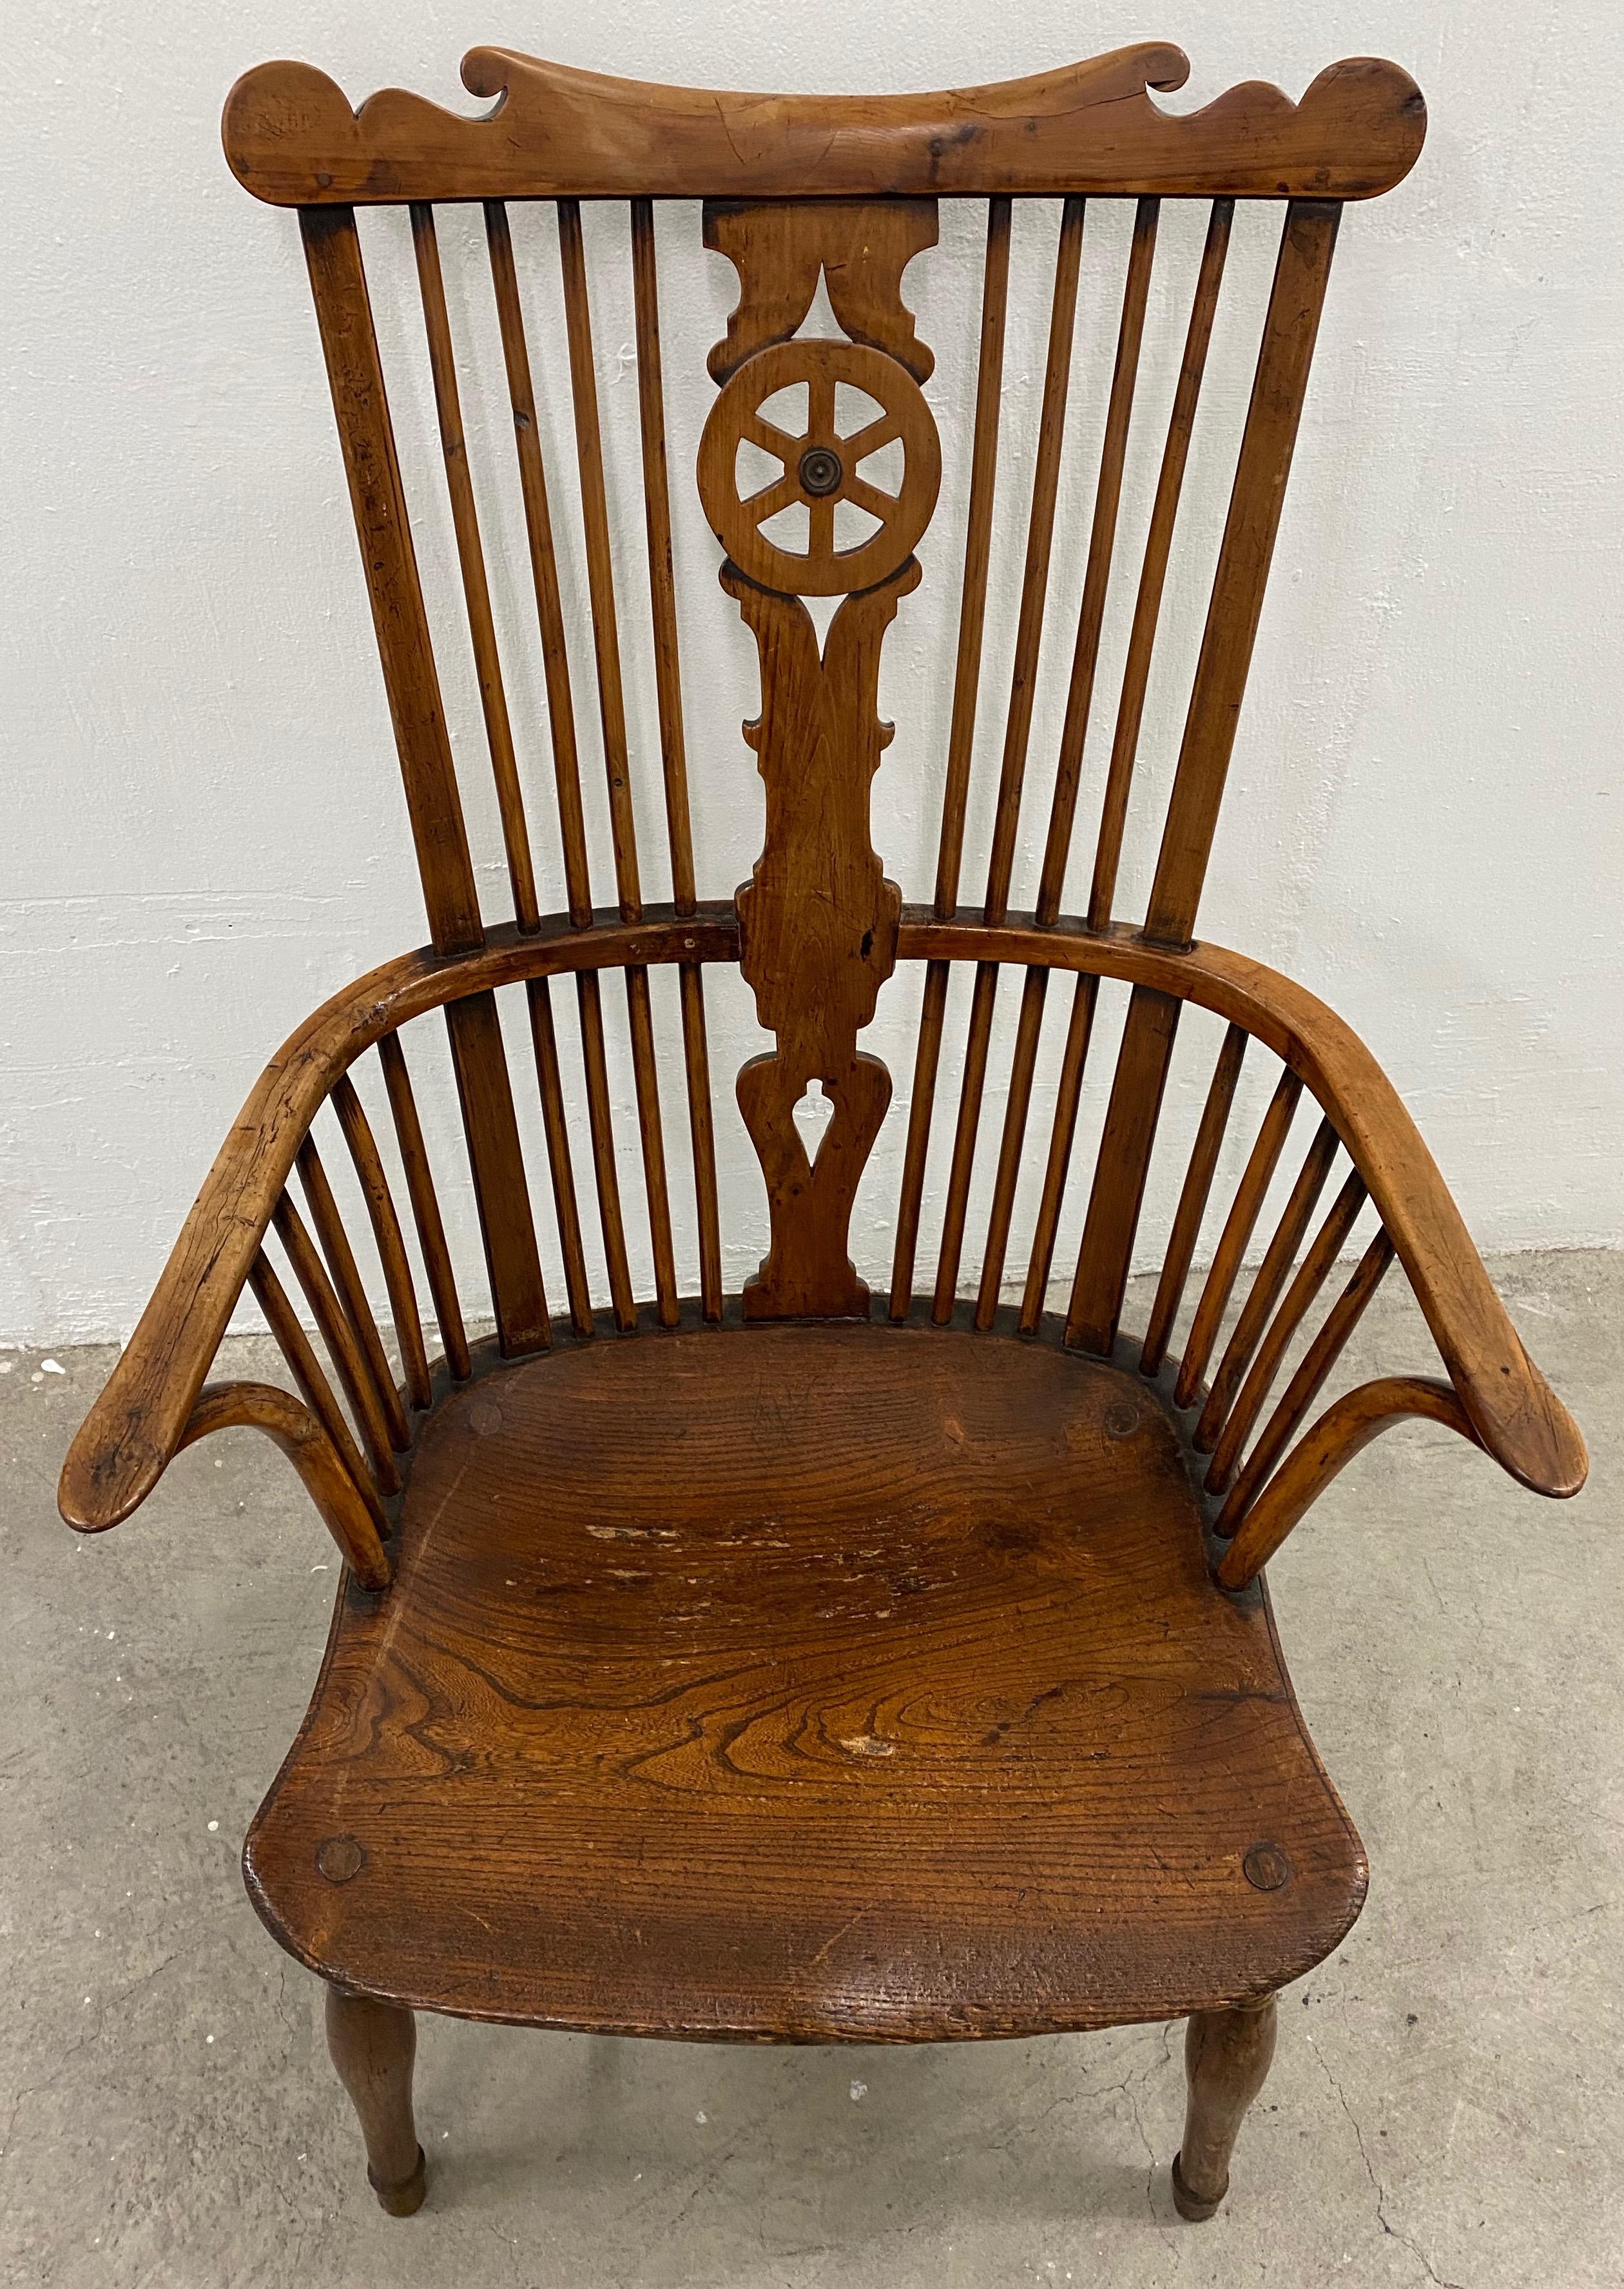 Hand-Crafted 19th Century European Yew Wood High Back Windsor Armchair For Sale